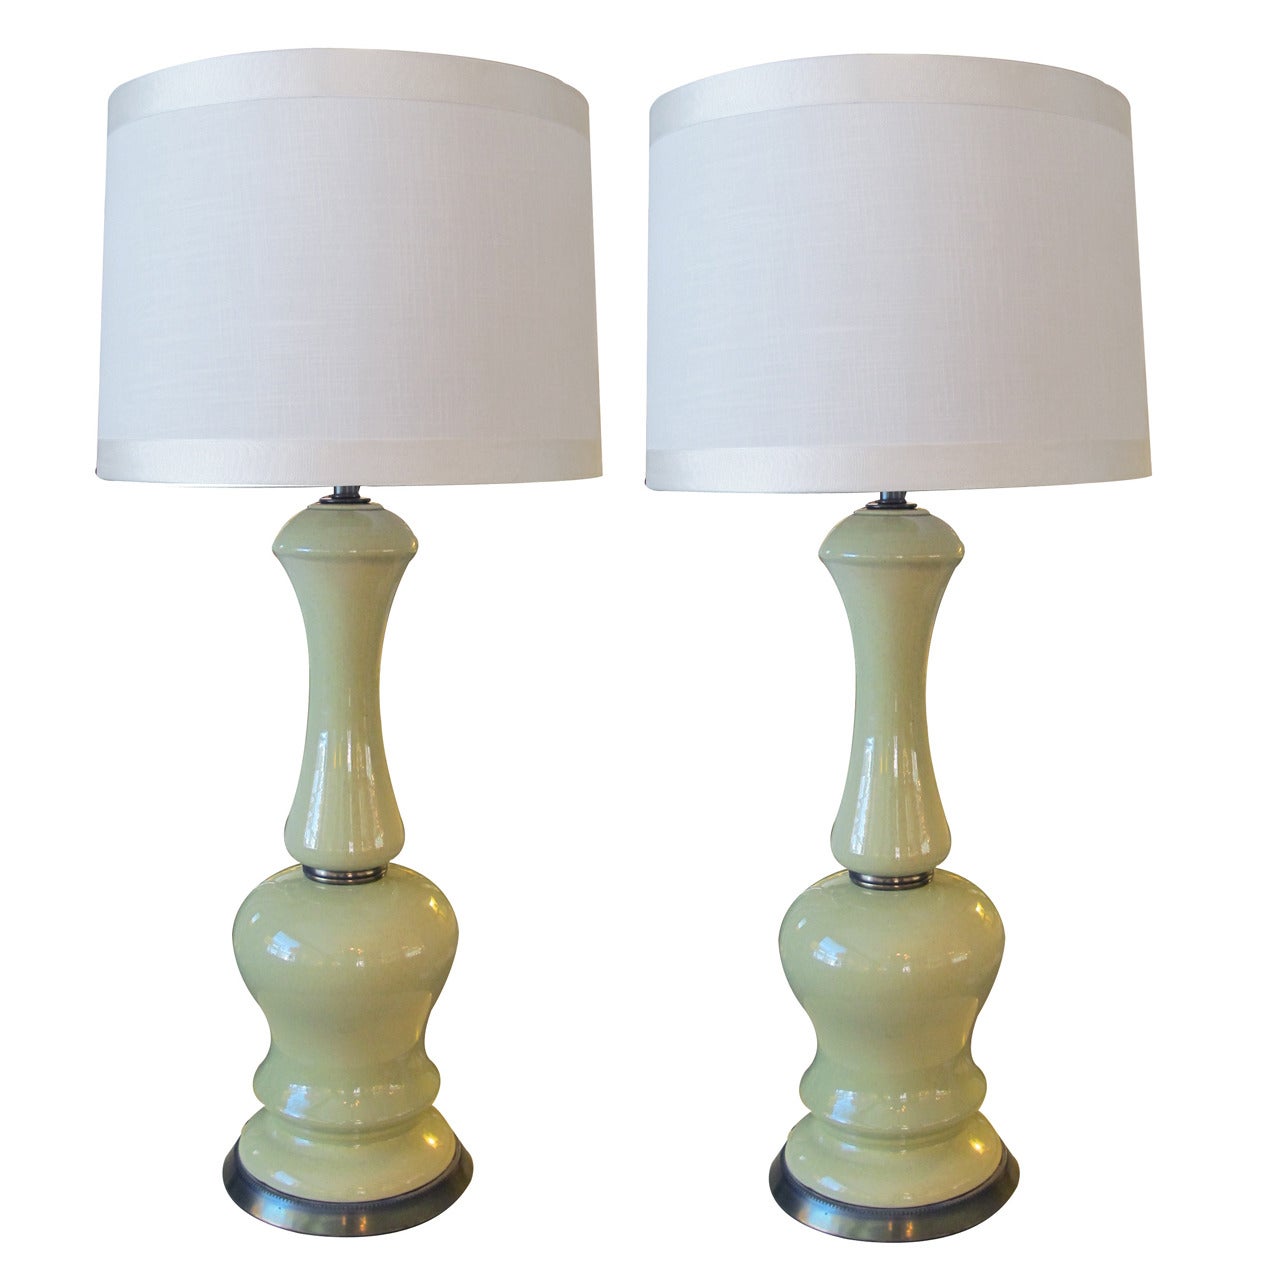 Pair of American Celadon Green Ceramic Lamps by Frederick Cooper, Chicago